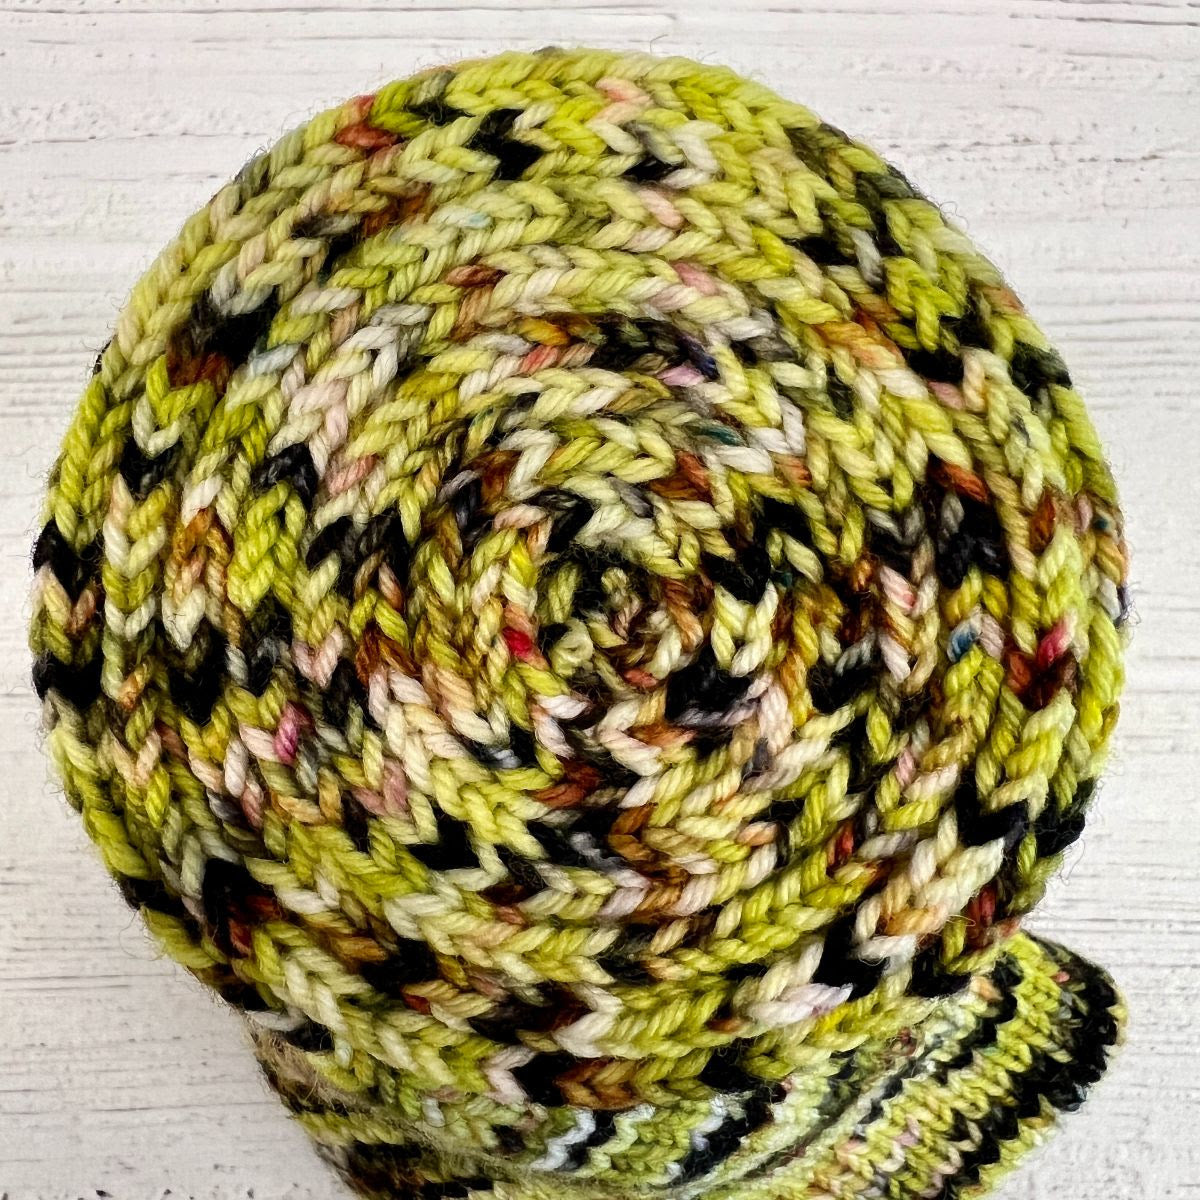 Knitted Wit HerStory 2023 yarn color yellow and black